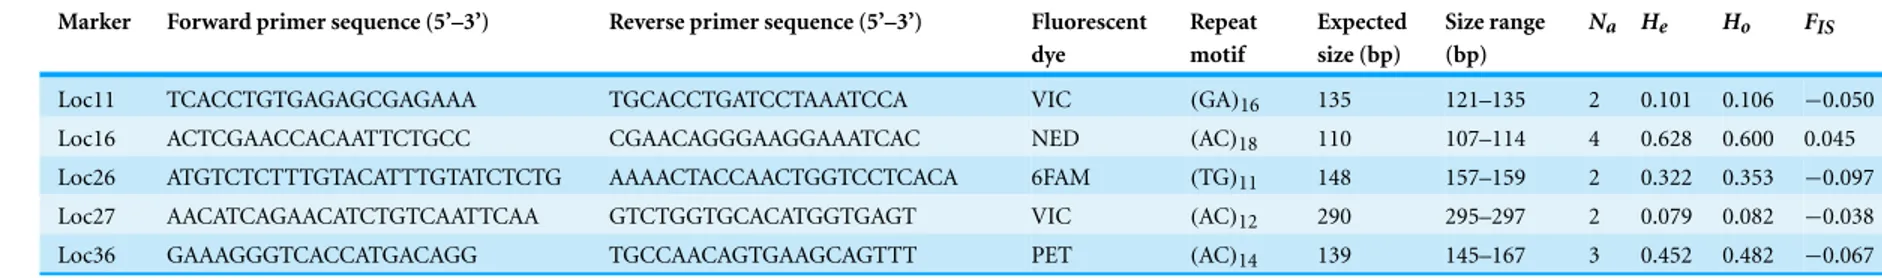 Table 1 Characterization of 5 polymorphic microsatellite loci for H. didactylus.